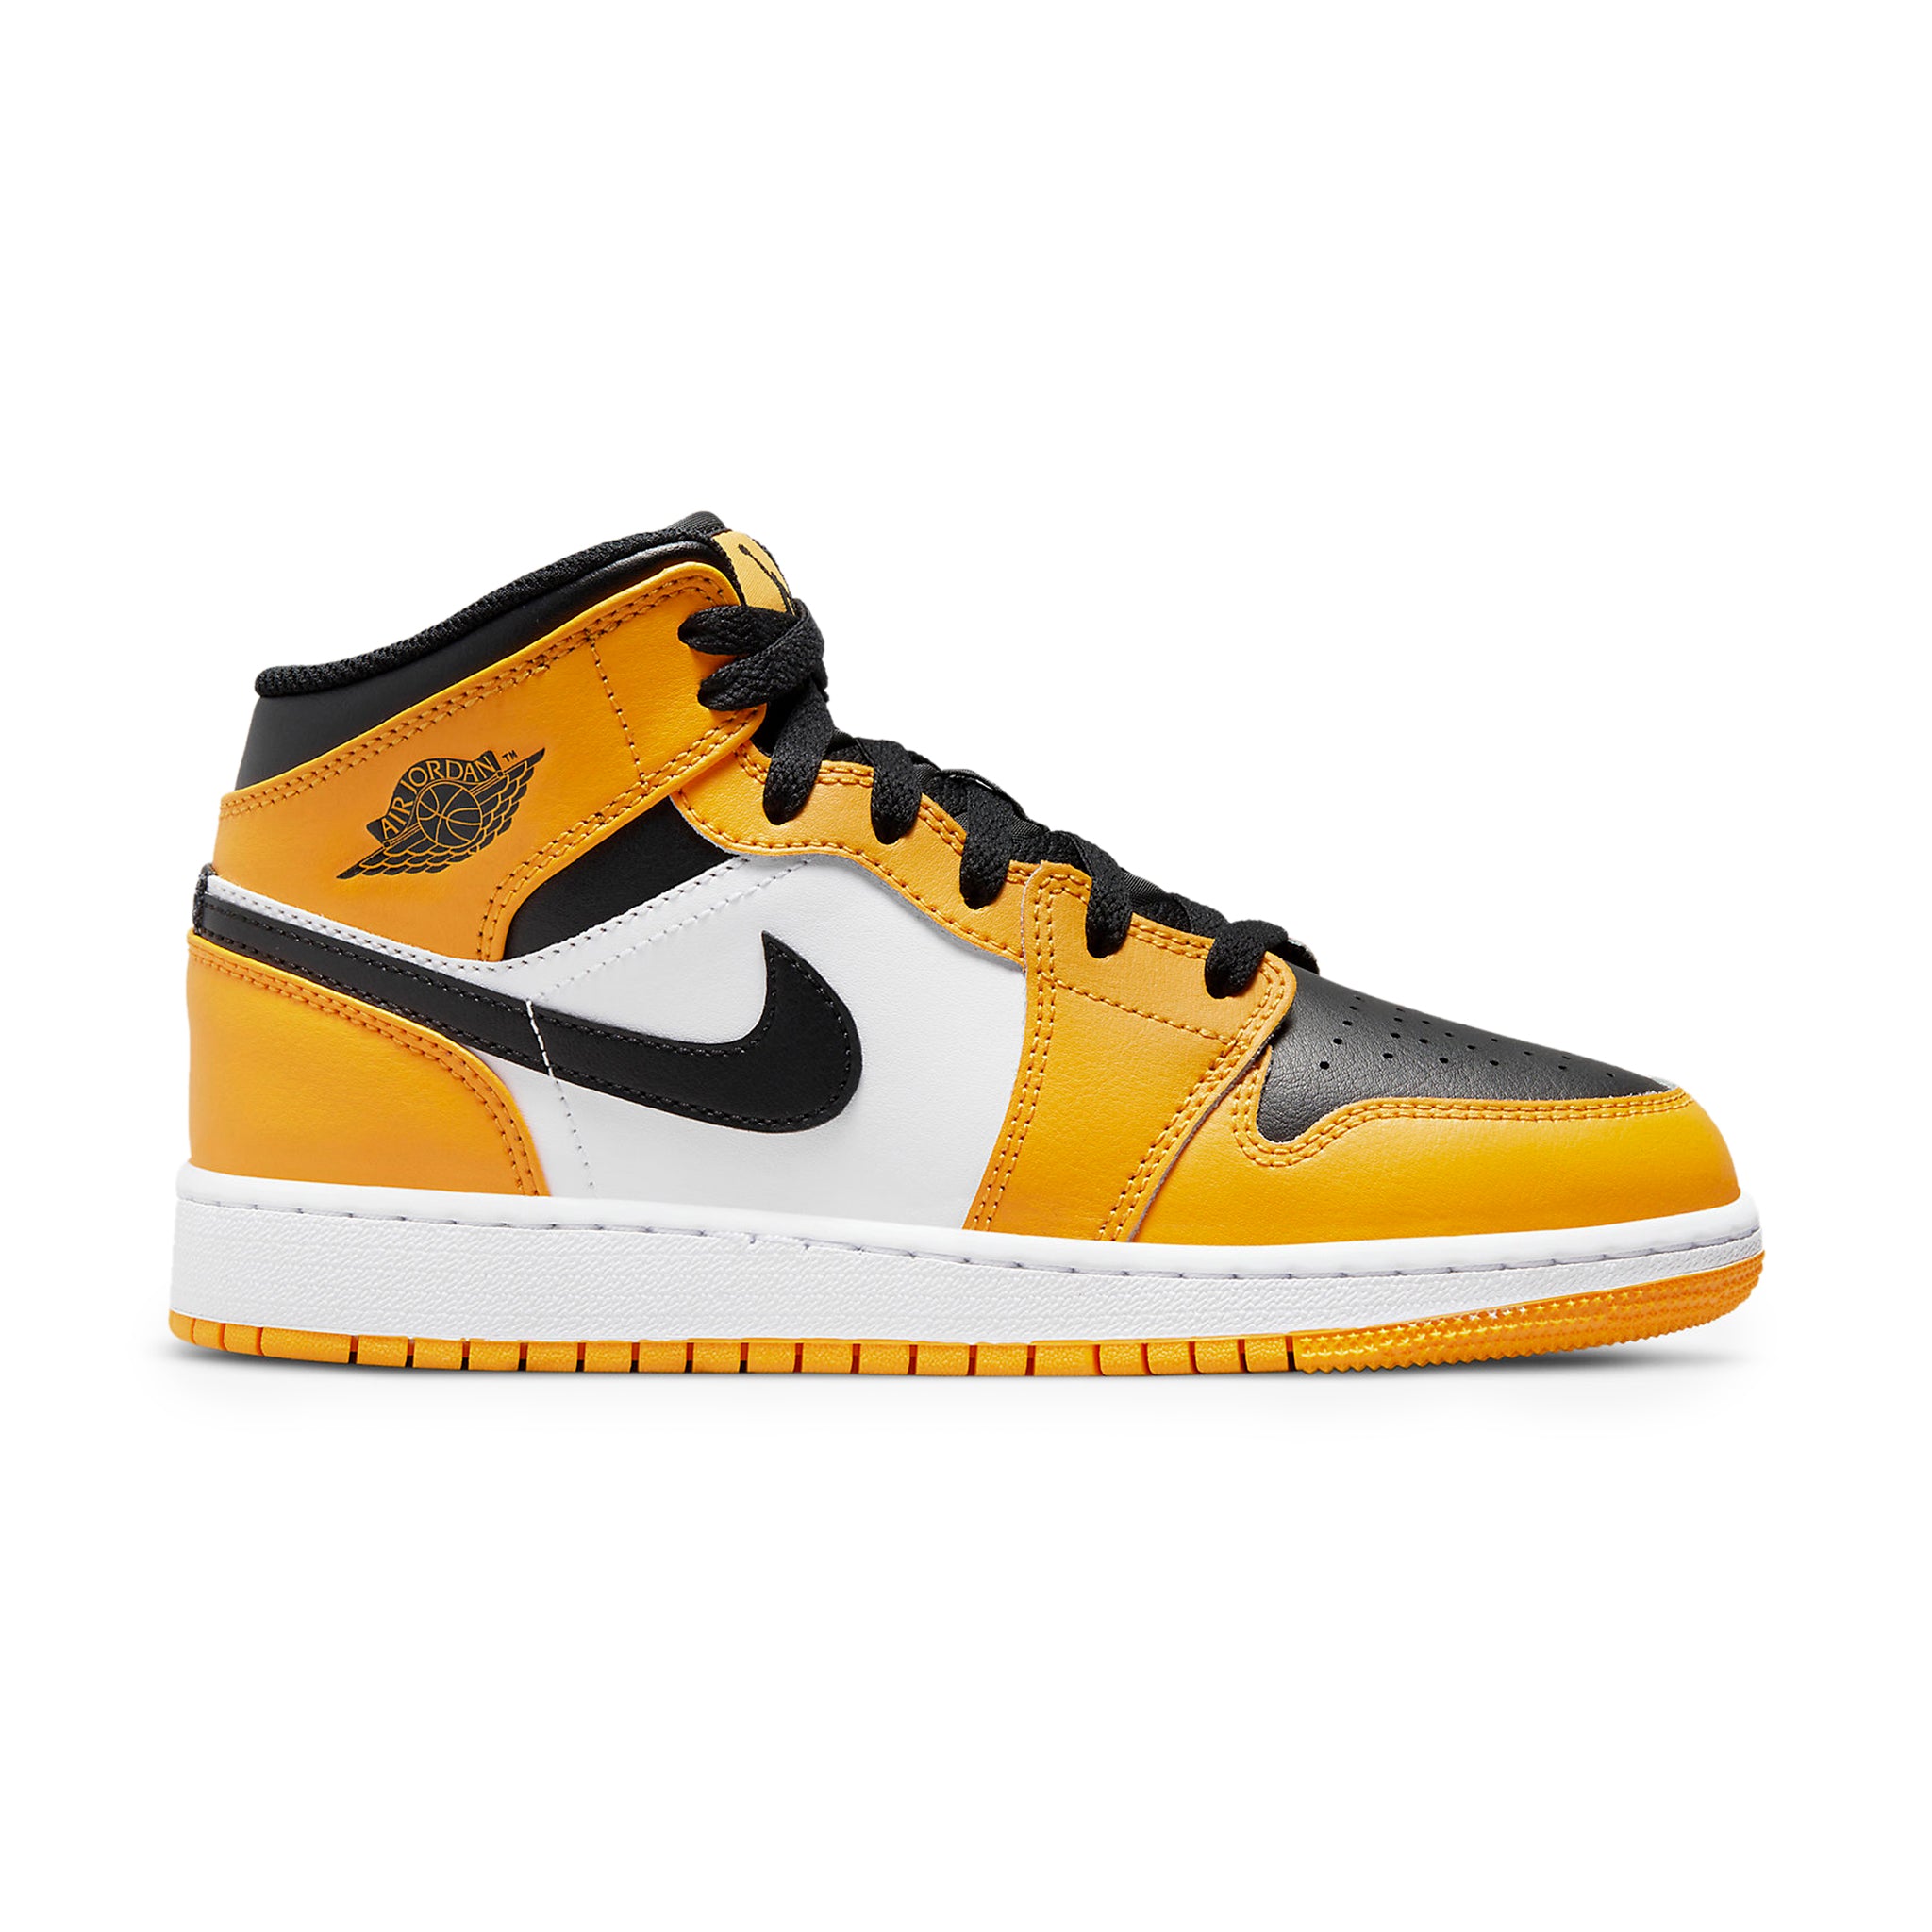 Side view of Air Jordan 1 Mid Taxi (GS) 554725-701